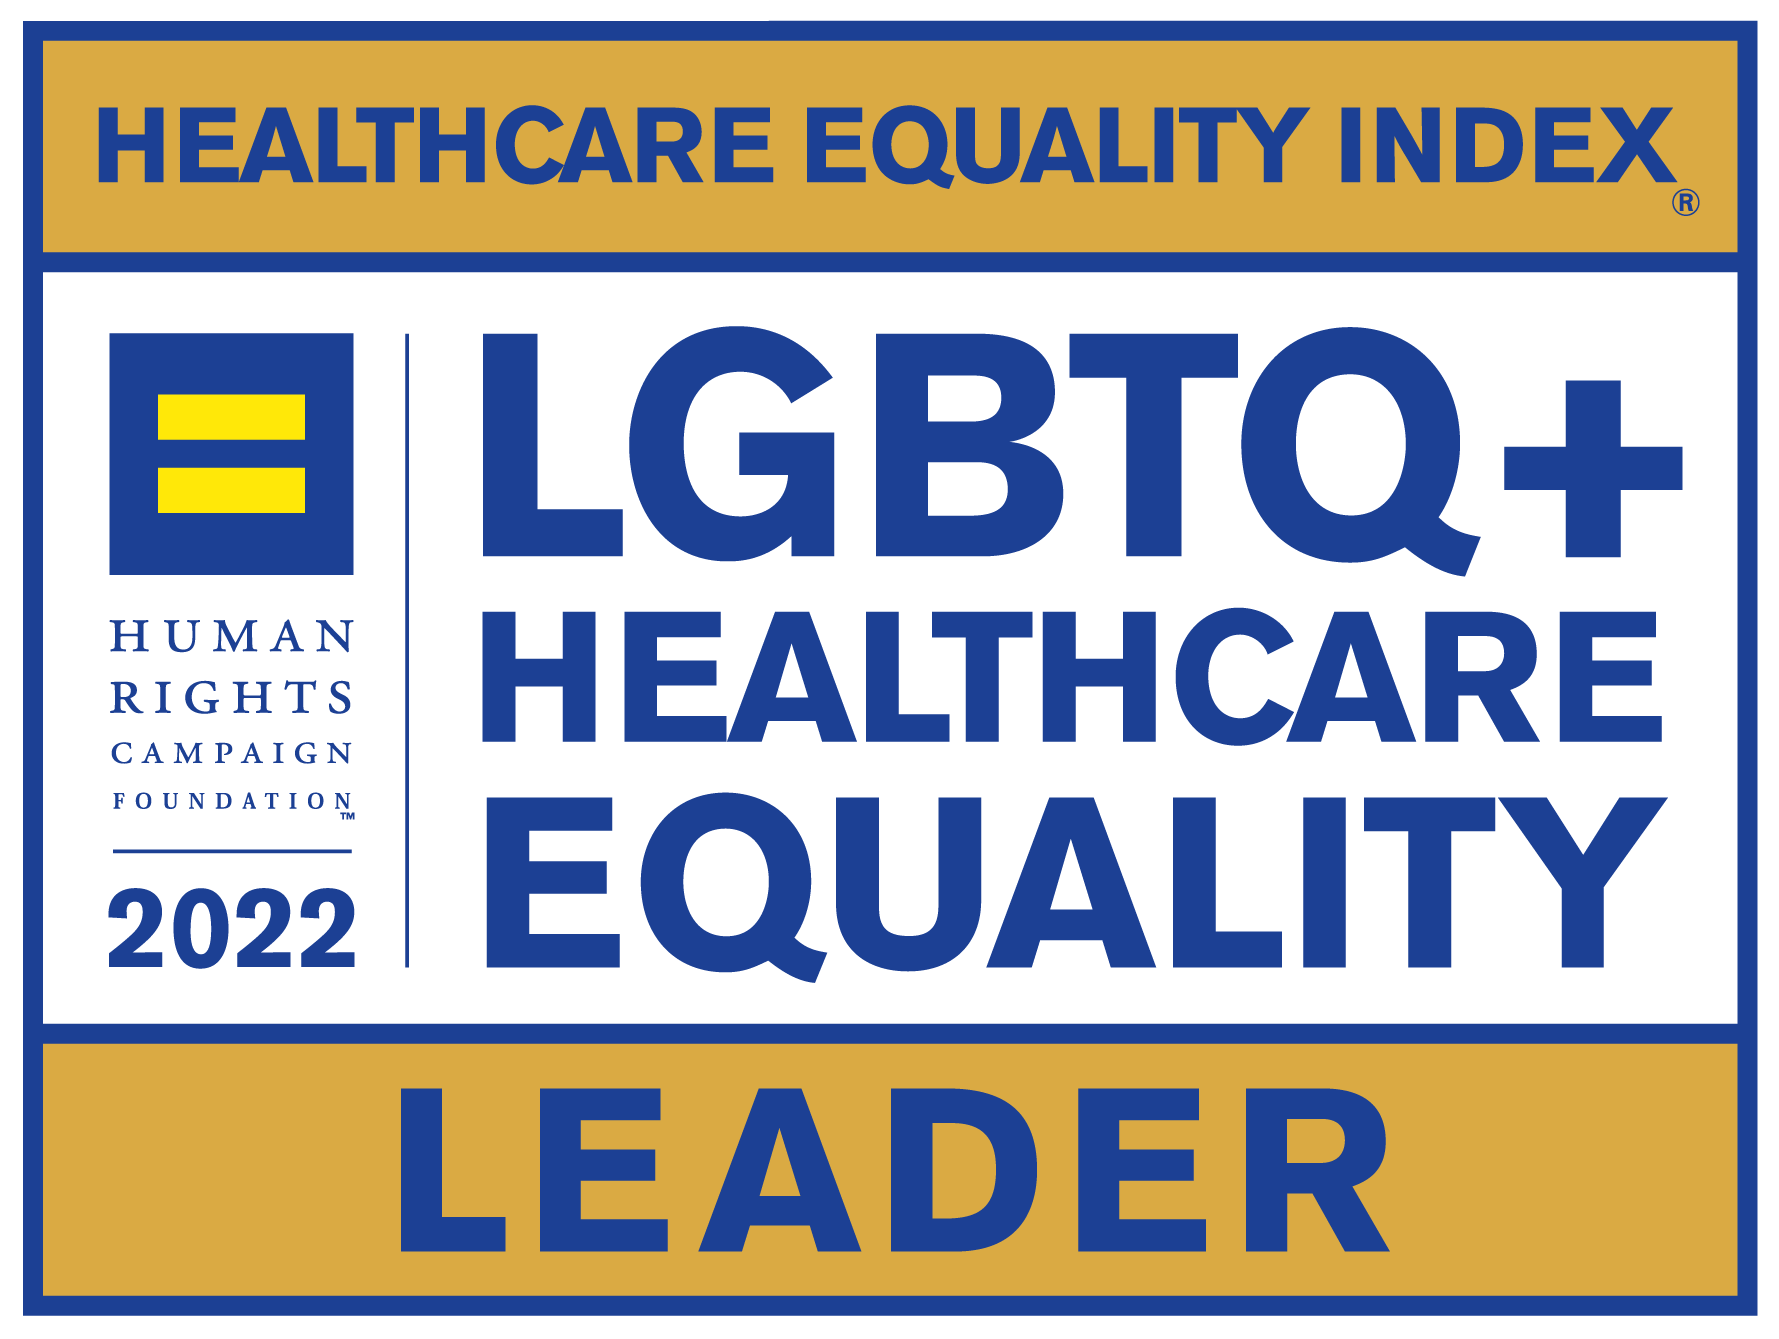 Picture of Healthcare Equity Index Leader in LGBTQ+ Healthcare Equality 2022 Leader from the Human Rights Campaign Foundation